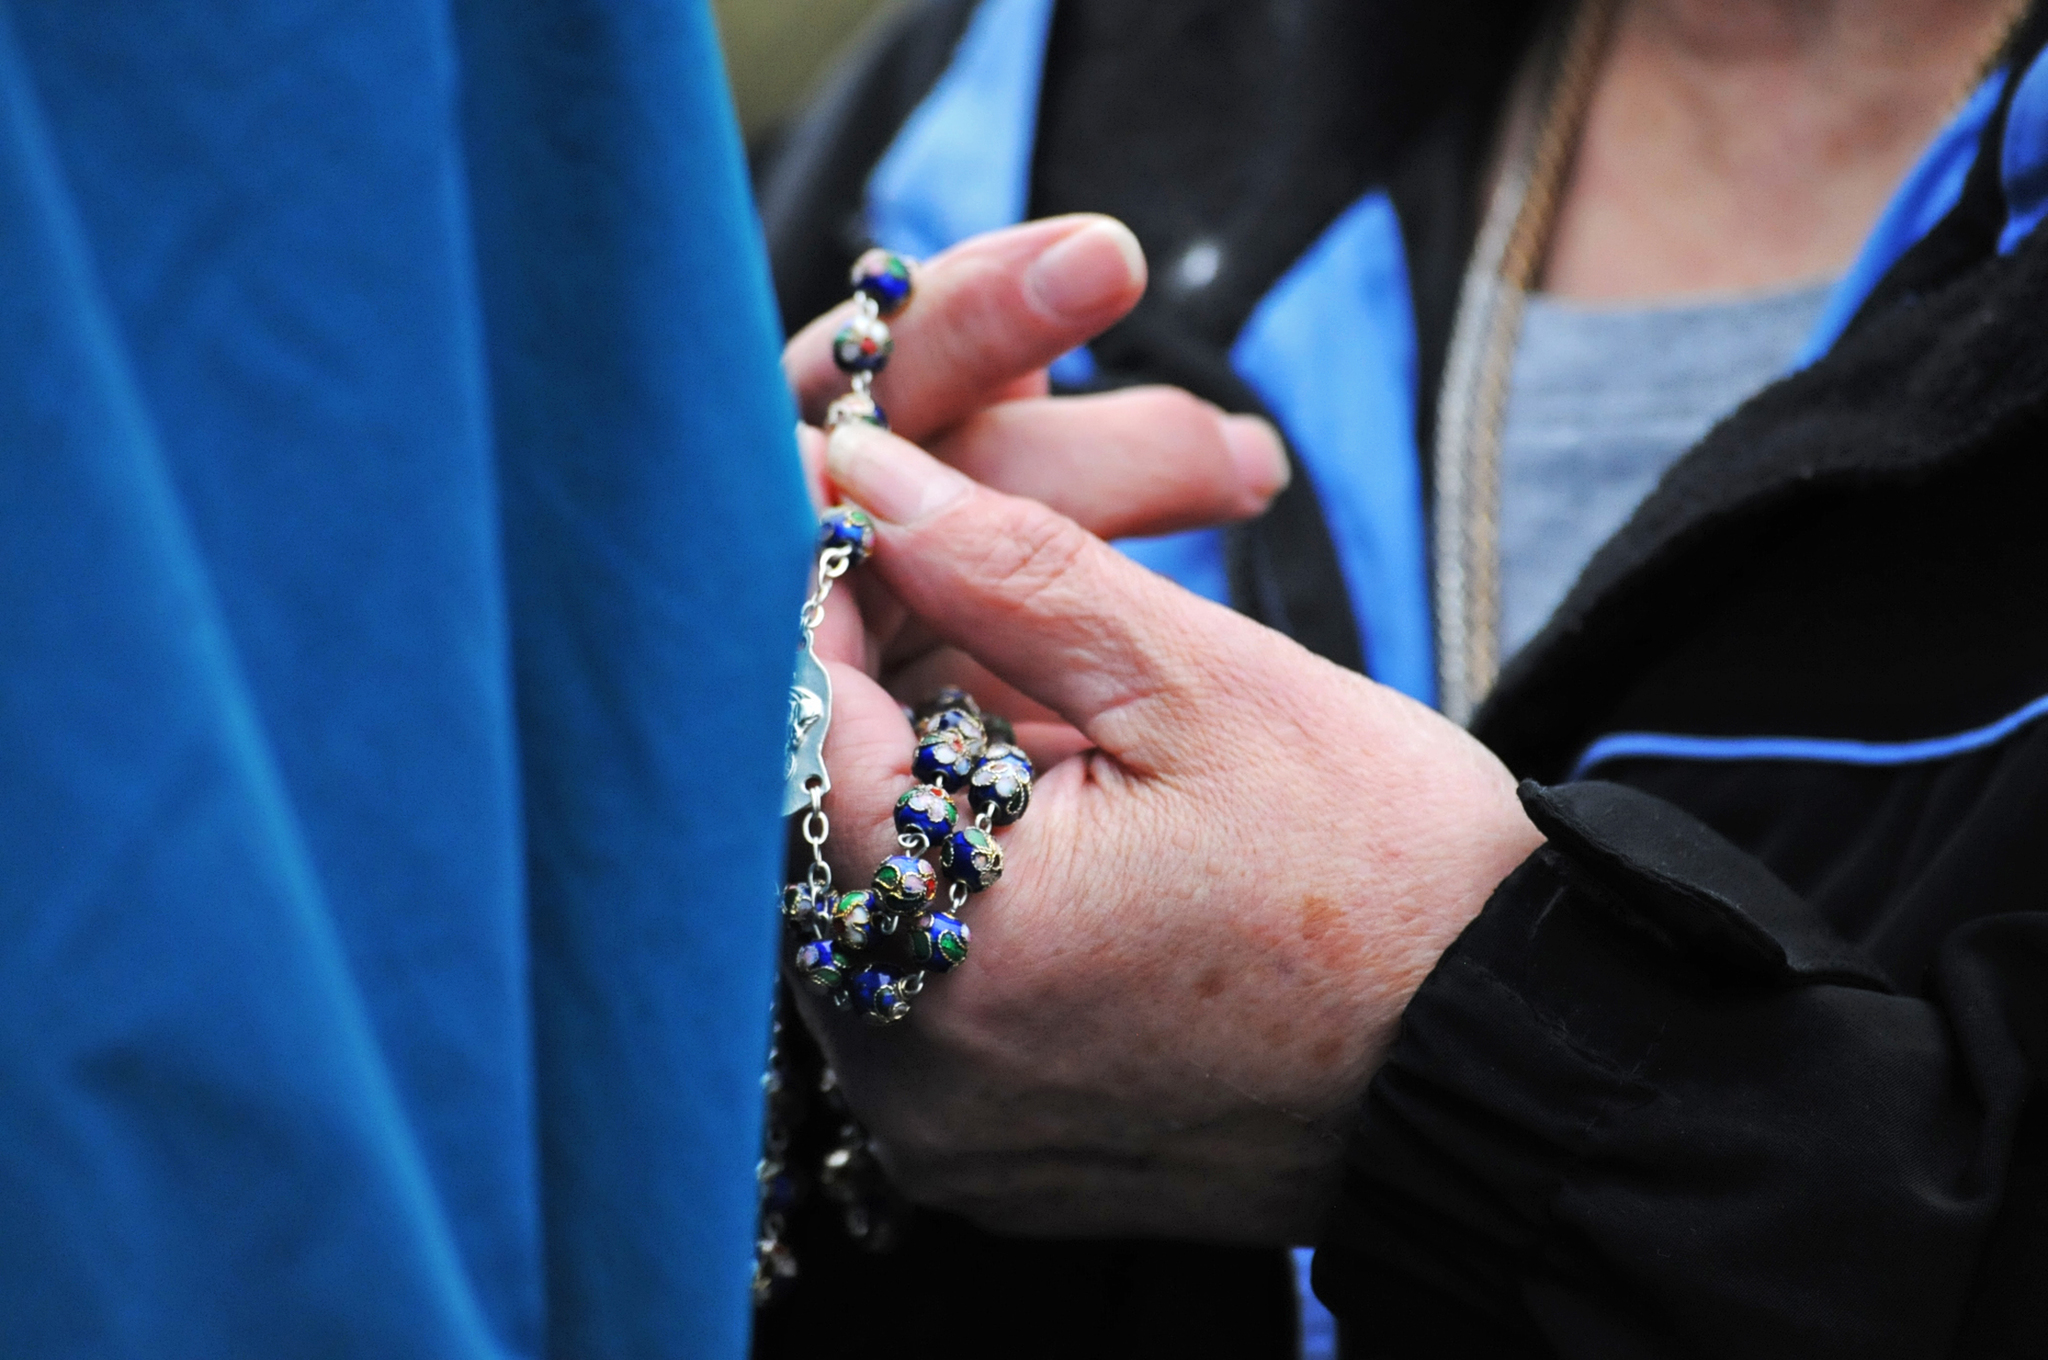 A member of the Catholic Church holds her rosary as she prays near a Planned Parenthood clinic in this Wednesday, Aug. 17, 2016 in Soldotna, Alaska. Members of the church gathered at the clinic before walking to the Kenai Peninsula Borough Administration Building to pray after a Satanic invocation was given to open the Aug. 9 borough assembly meeting. (Elizabeth Earl/Peninsula Clarion, File)